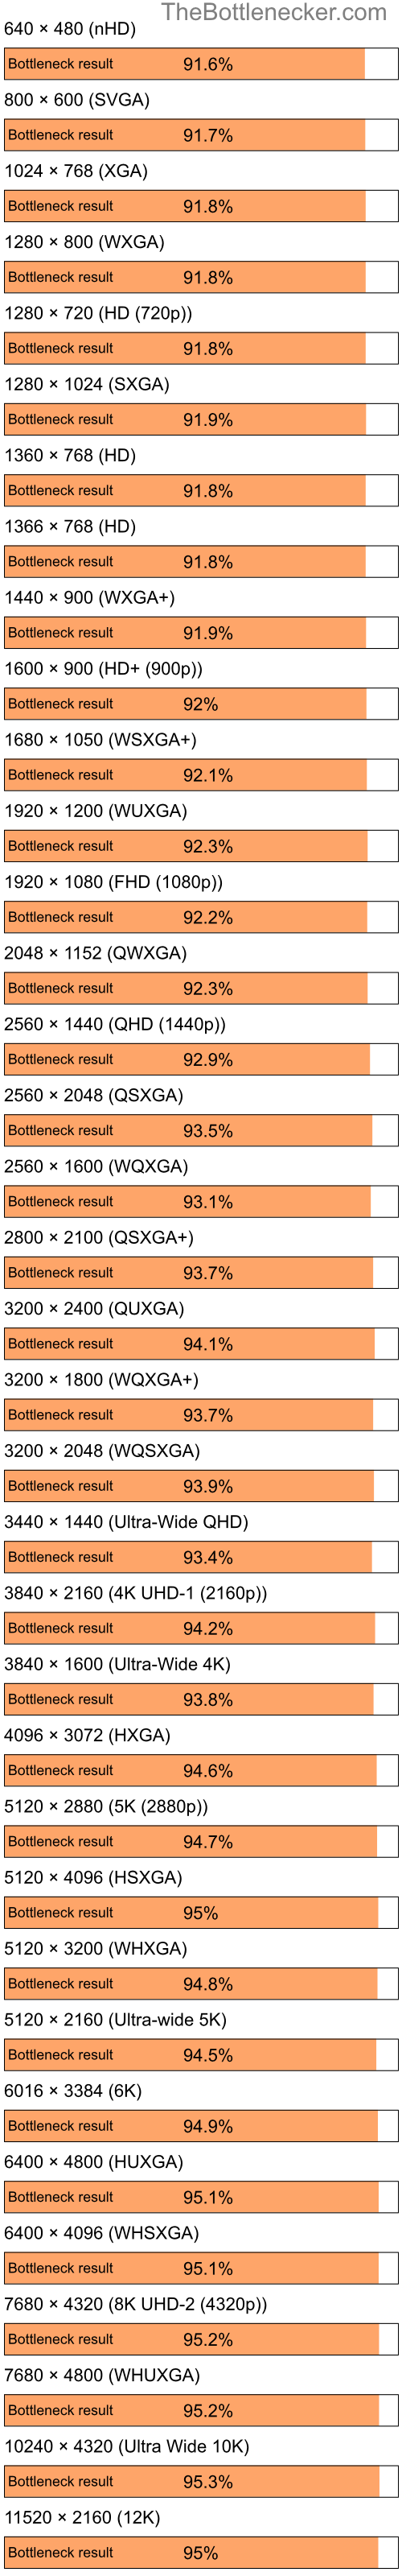 Bottleneck results by resolution for Intel Pentium 4 and NVIDIA GeForce4 MX 4000 in Graphic Card Intense Tasks